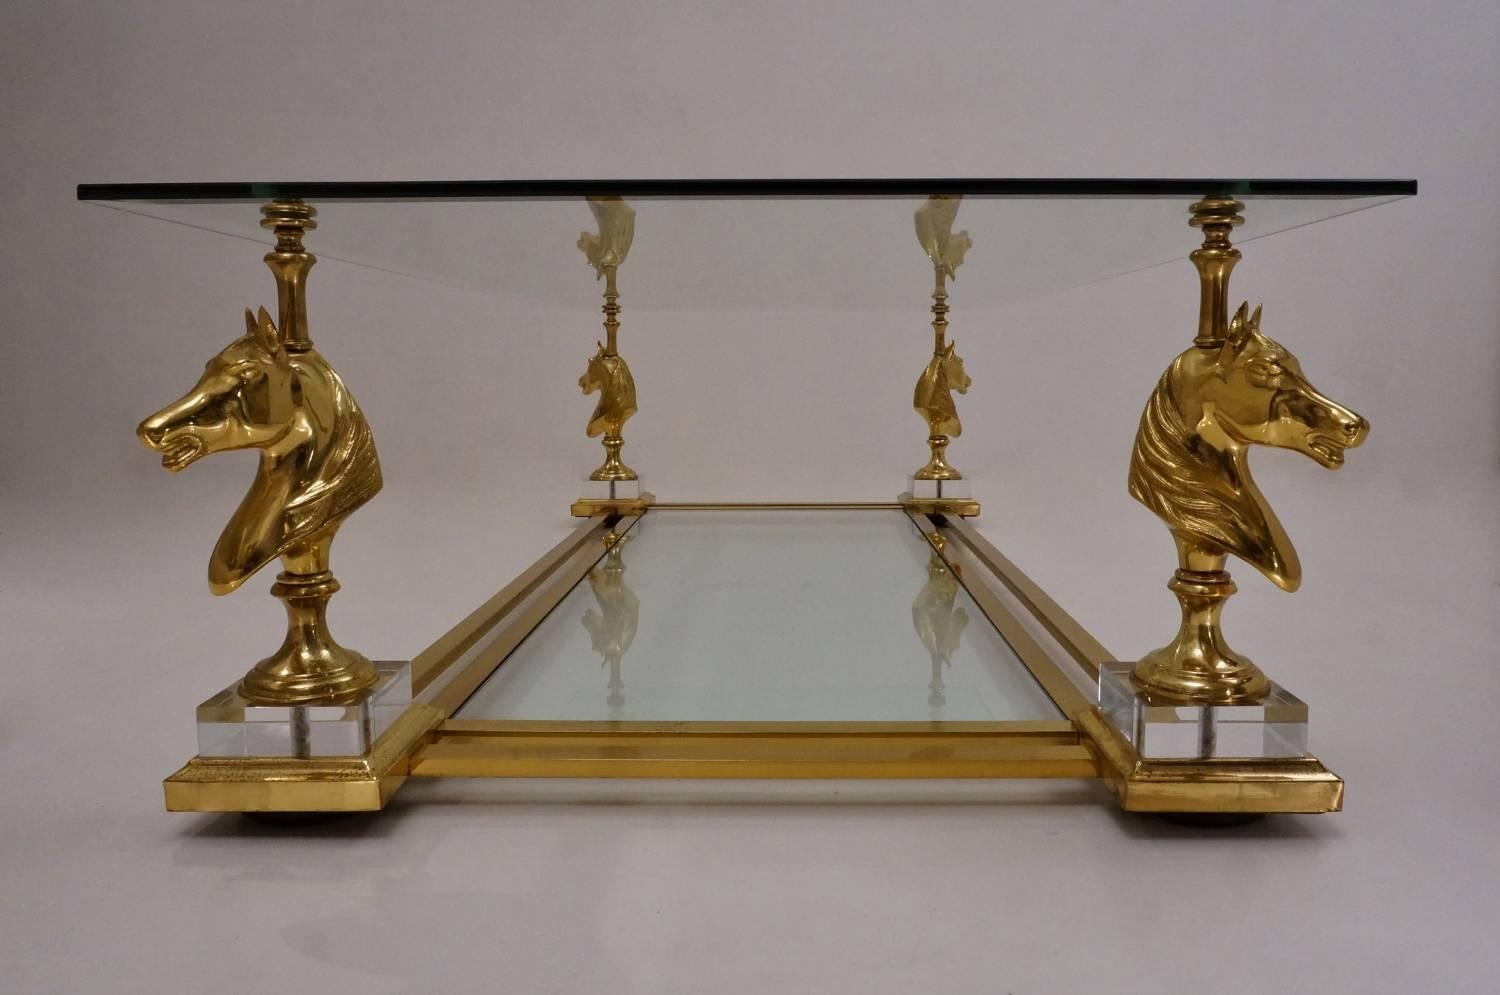 Post-Modern Maison Charles Cheval Coffee Table, Brass and Lucite, circa 1970s, French